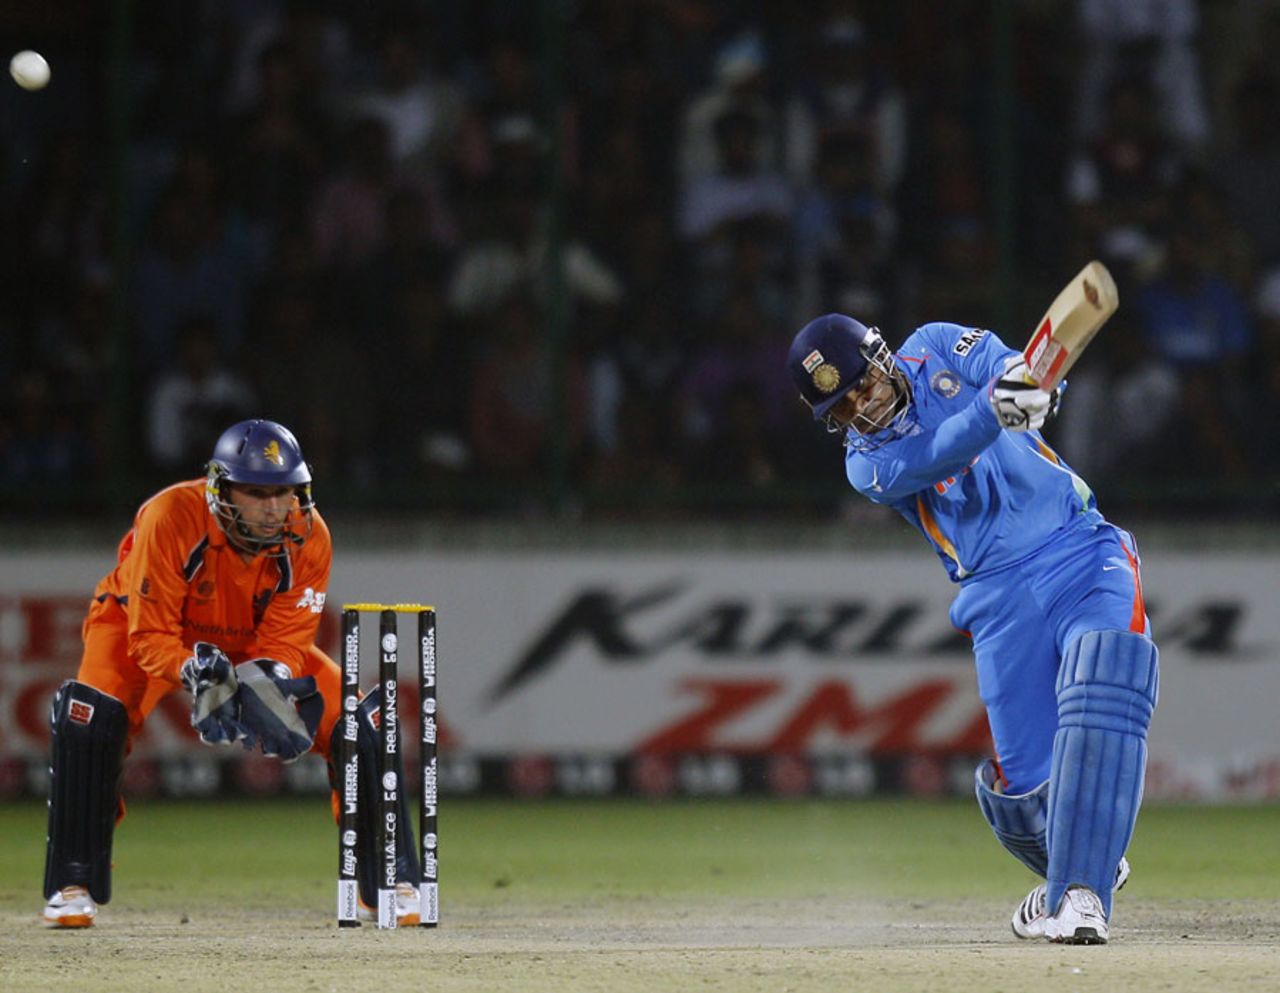 Virender Sehwag hits one over extra cover, India v Netherlands, Group B, World Cup, Delhi, March 9, 2011